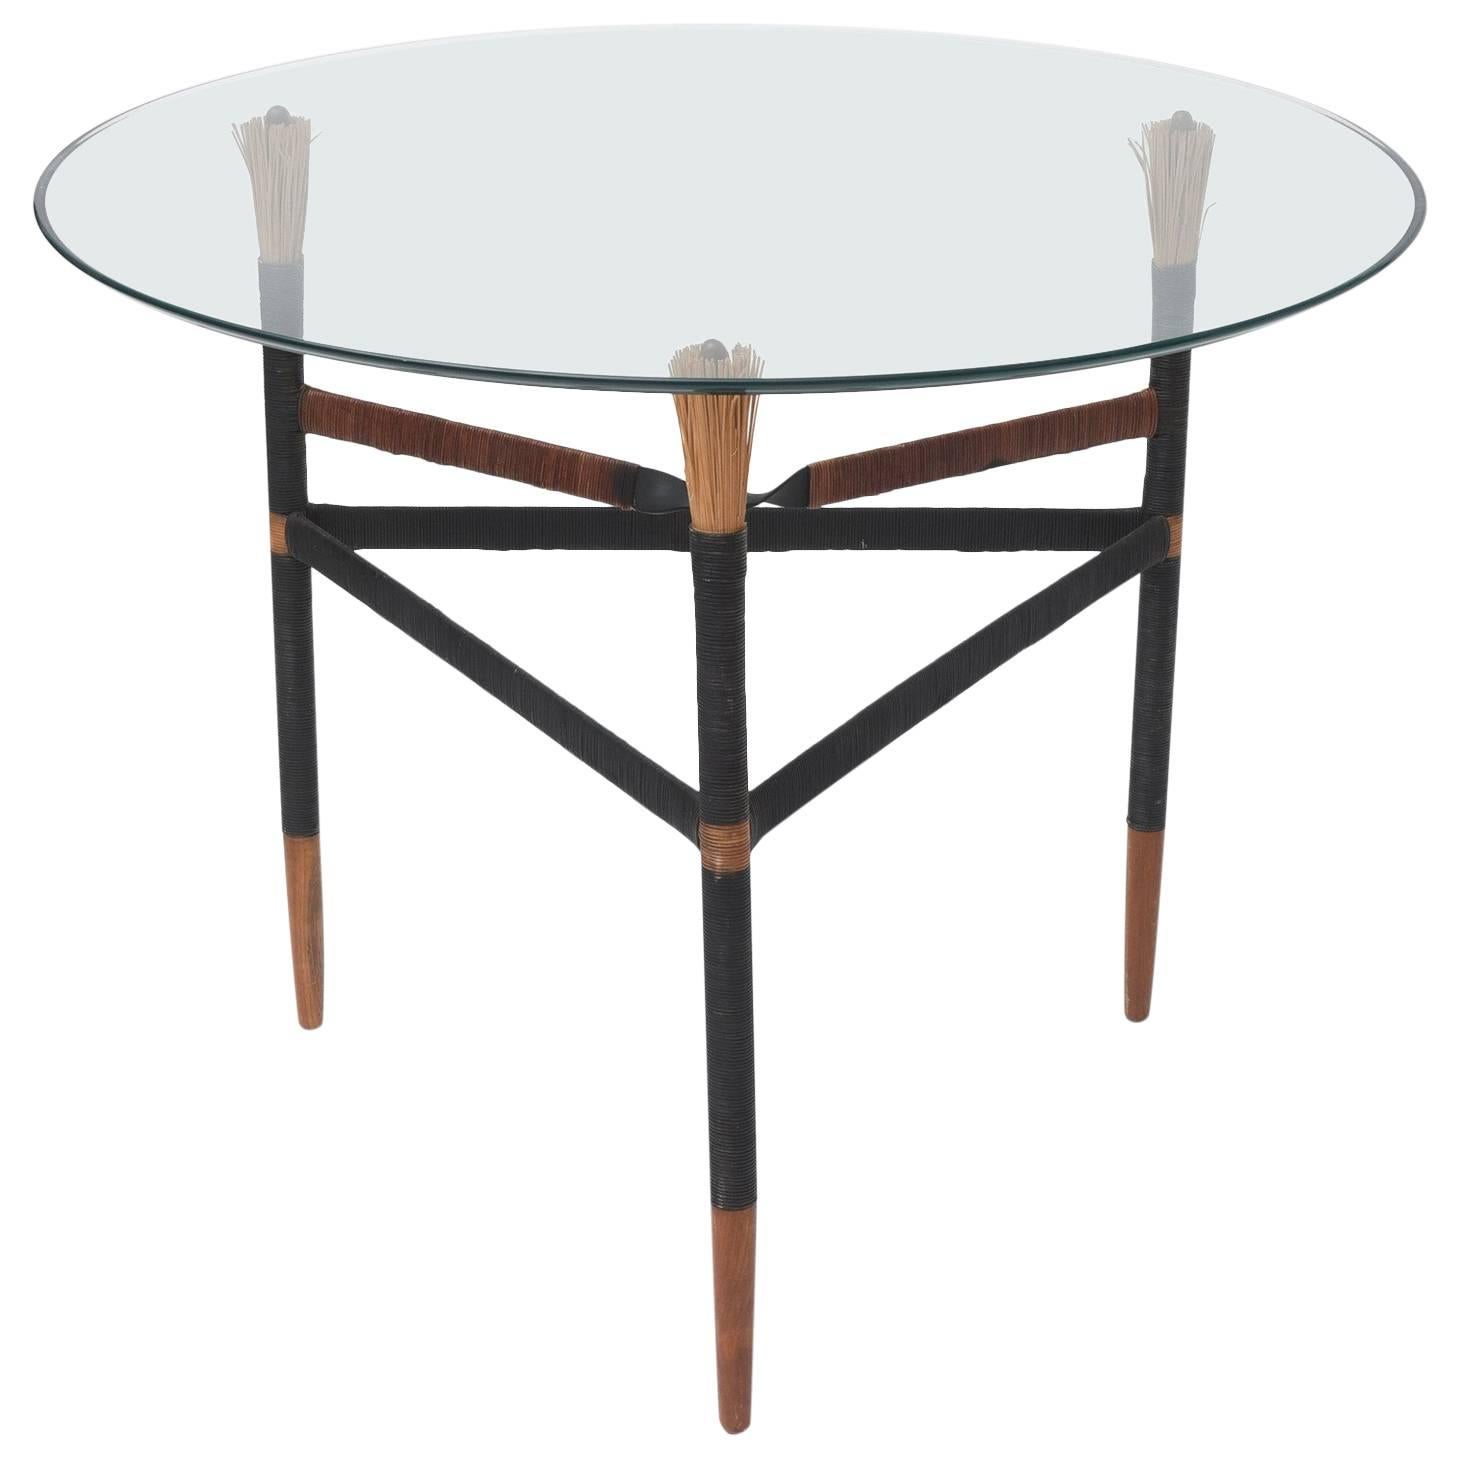 Rohe Noordwolde Iron and straw table